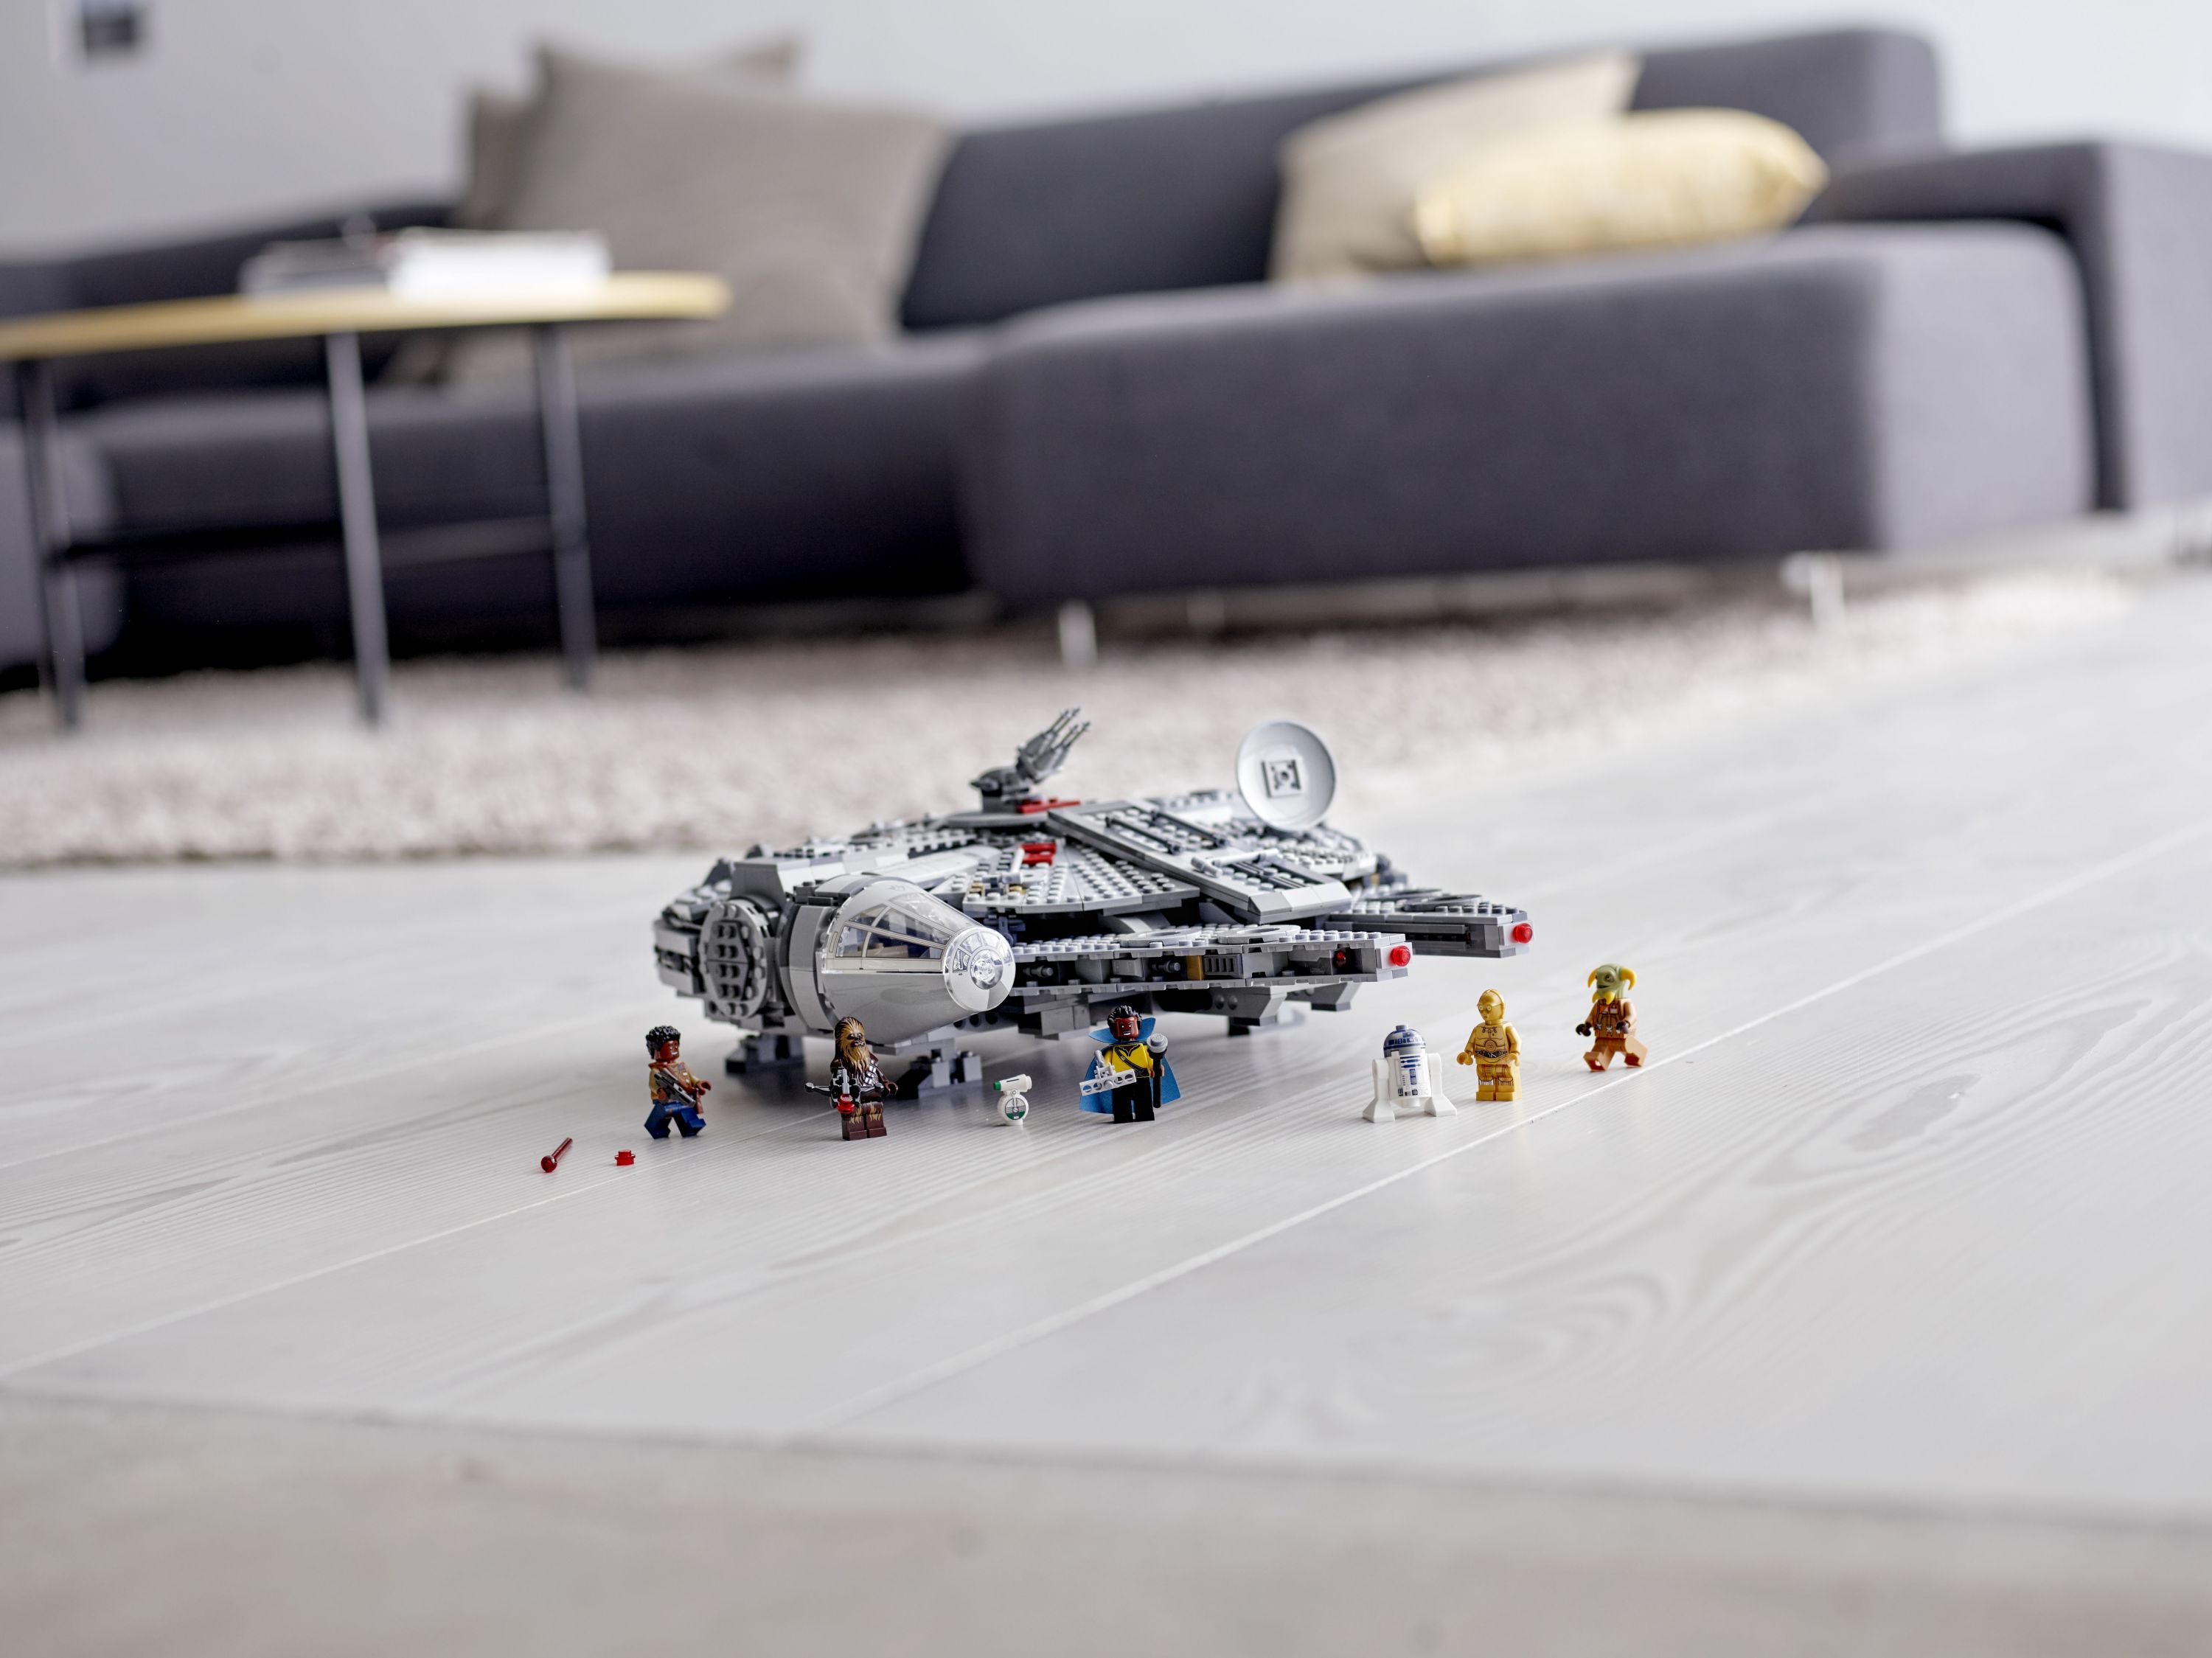 LEGO Star Wars Millennium Falcon 75257 Building Set - Starship Model with Finn, Chewbacca, Lando Calrissian, Boolio, C-3PO, R2-D2, and D-O Minifigures, The Rise of Skywalker Movie Collection - image 9 of 9